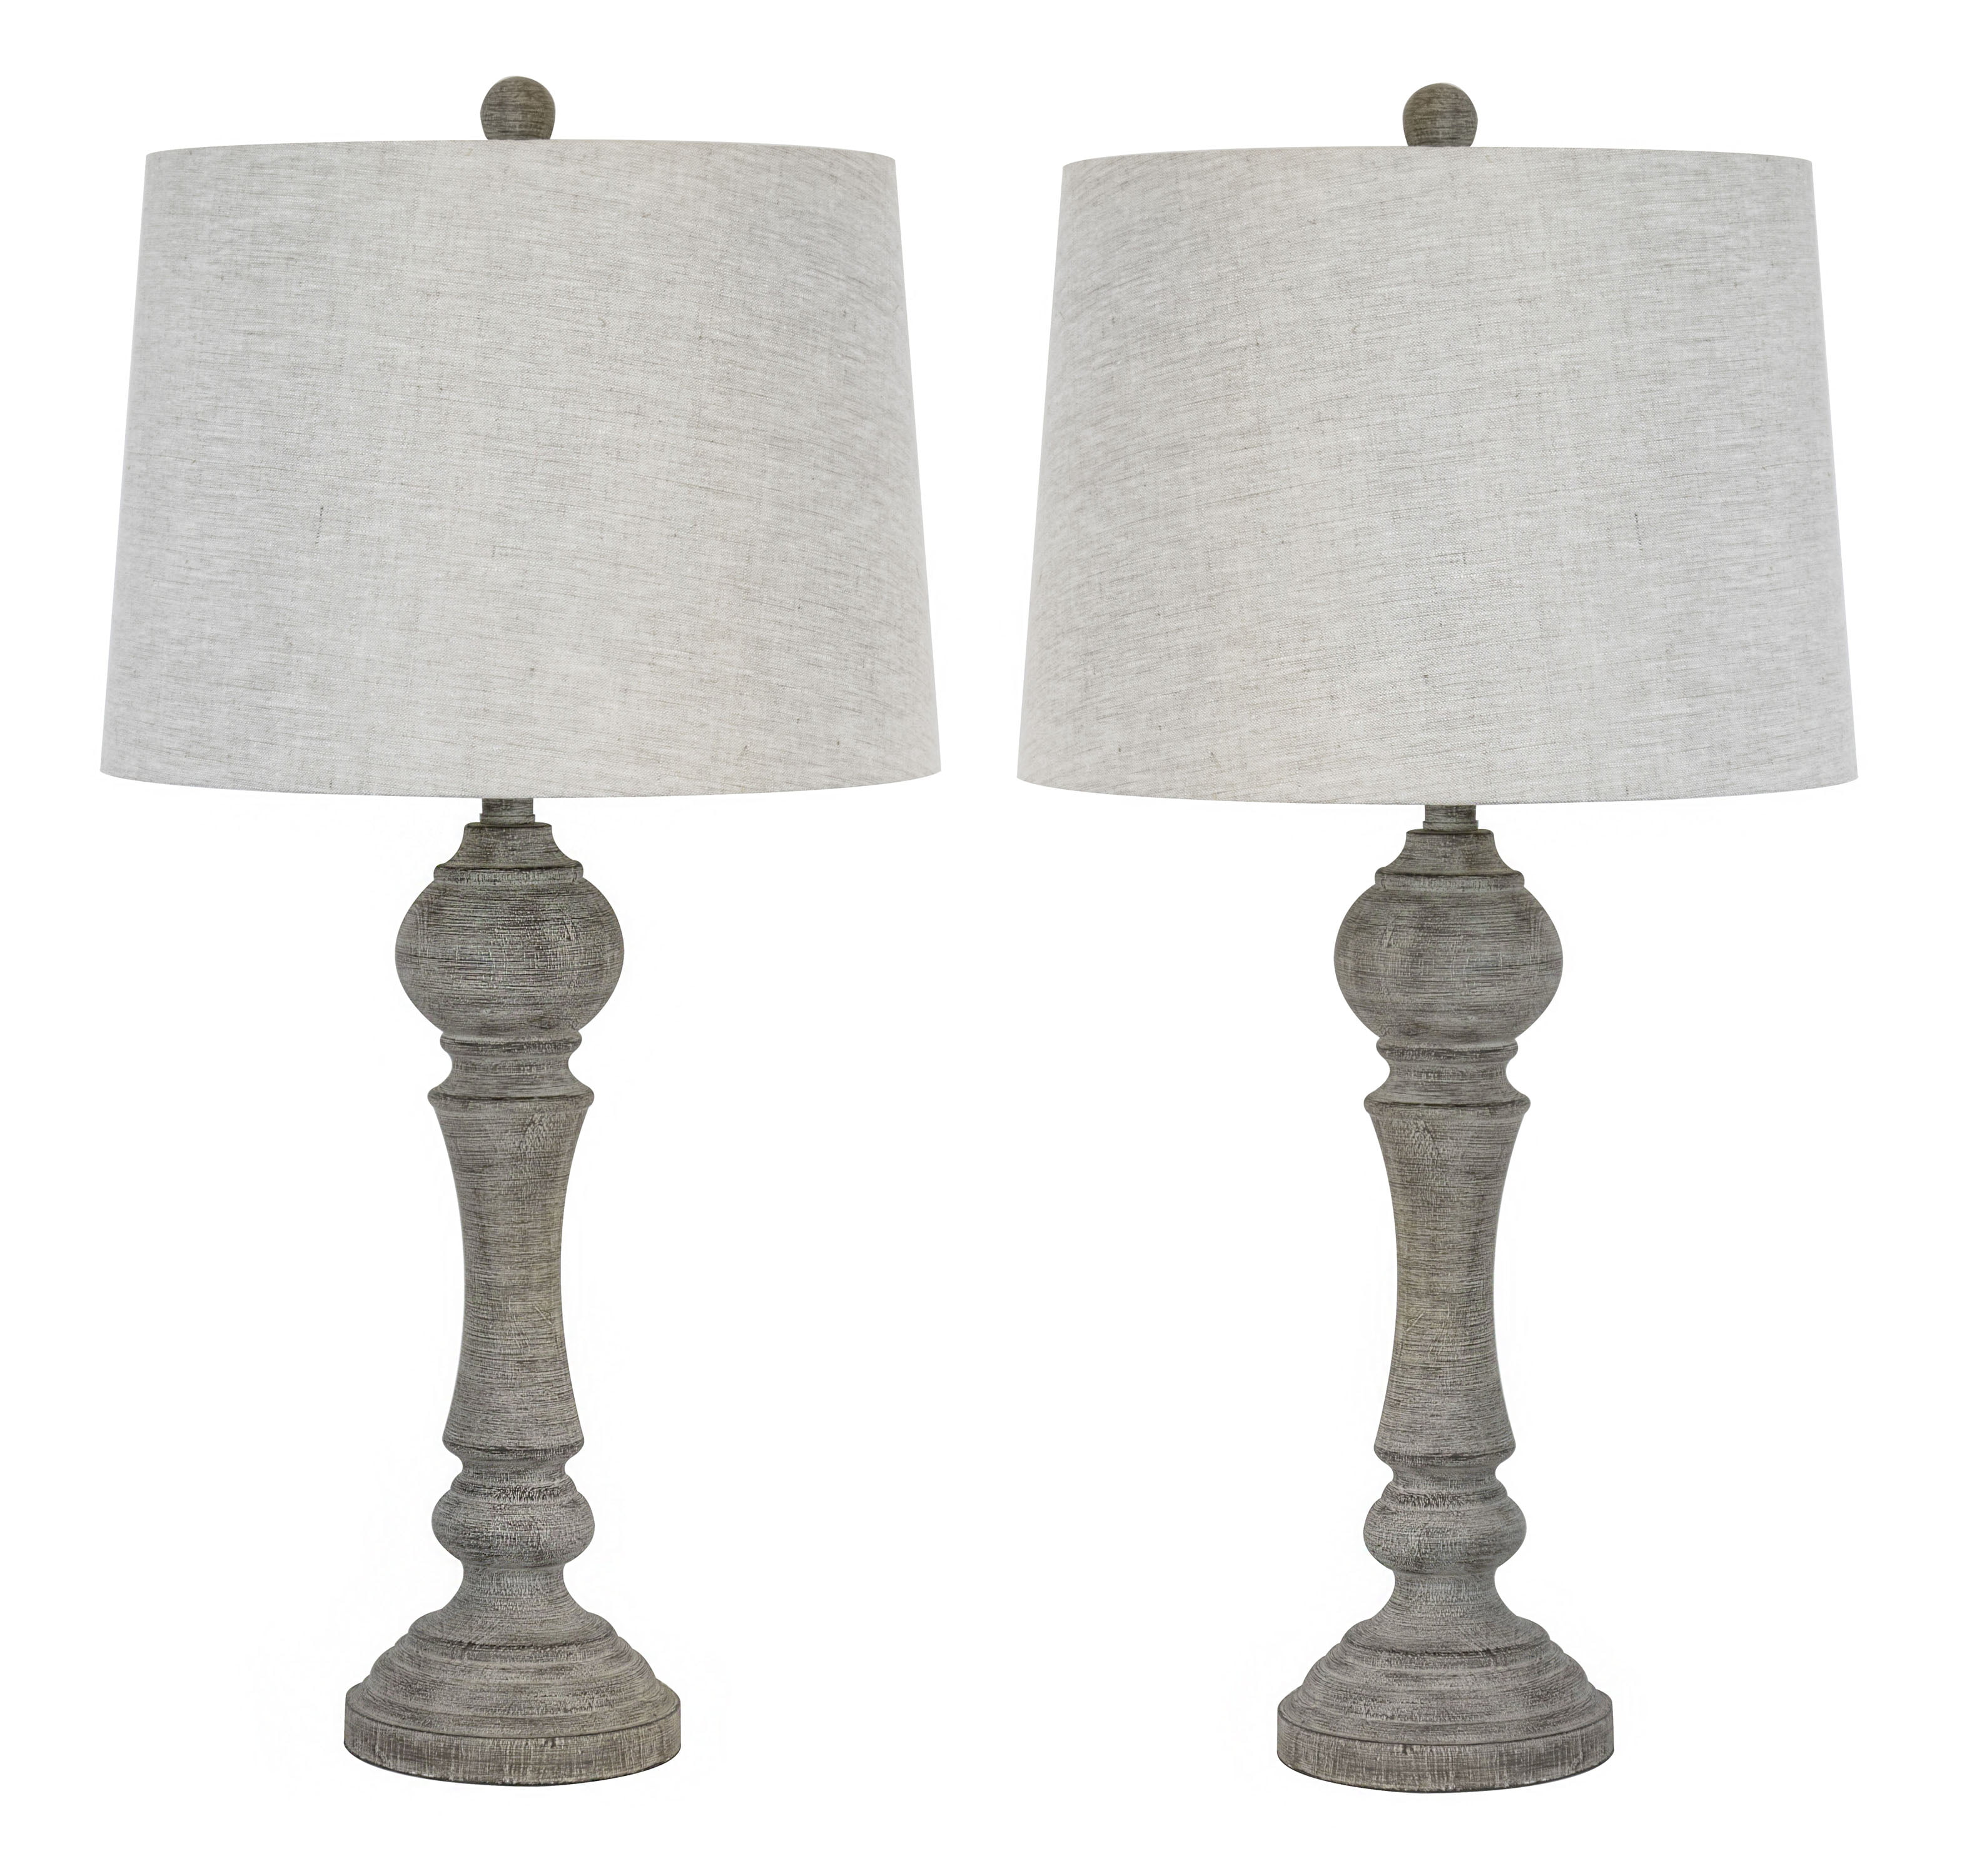 32" Reclaimed Grey Table Lamps w/ Linen Lamp Shades, Set of Two